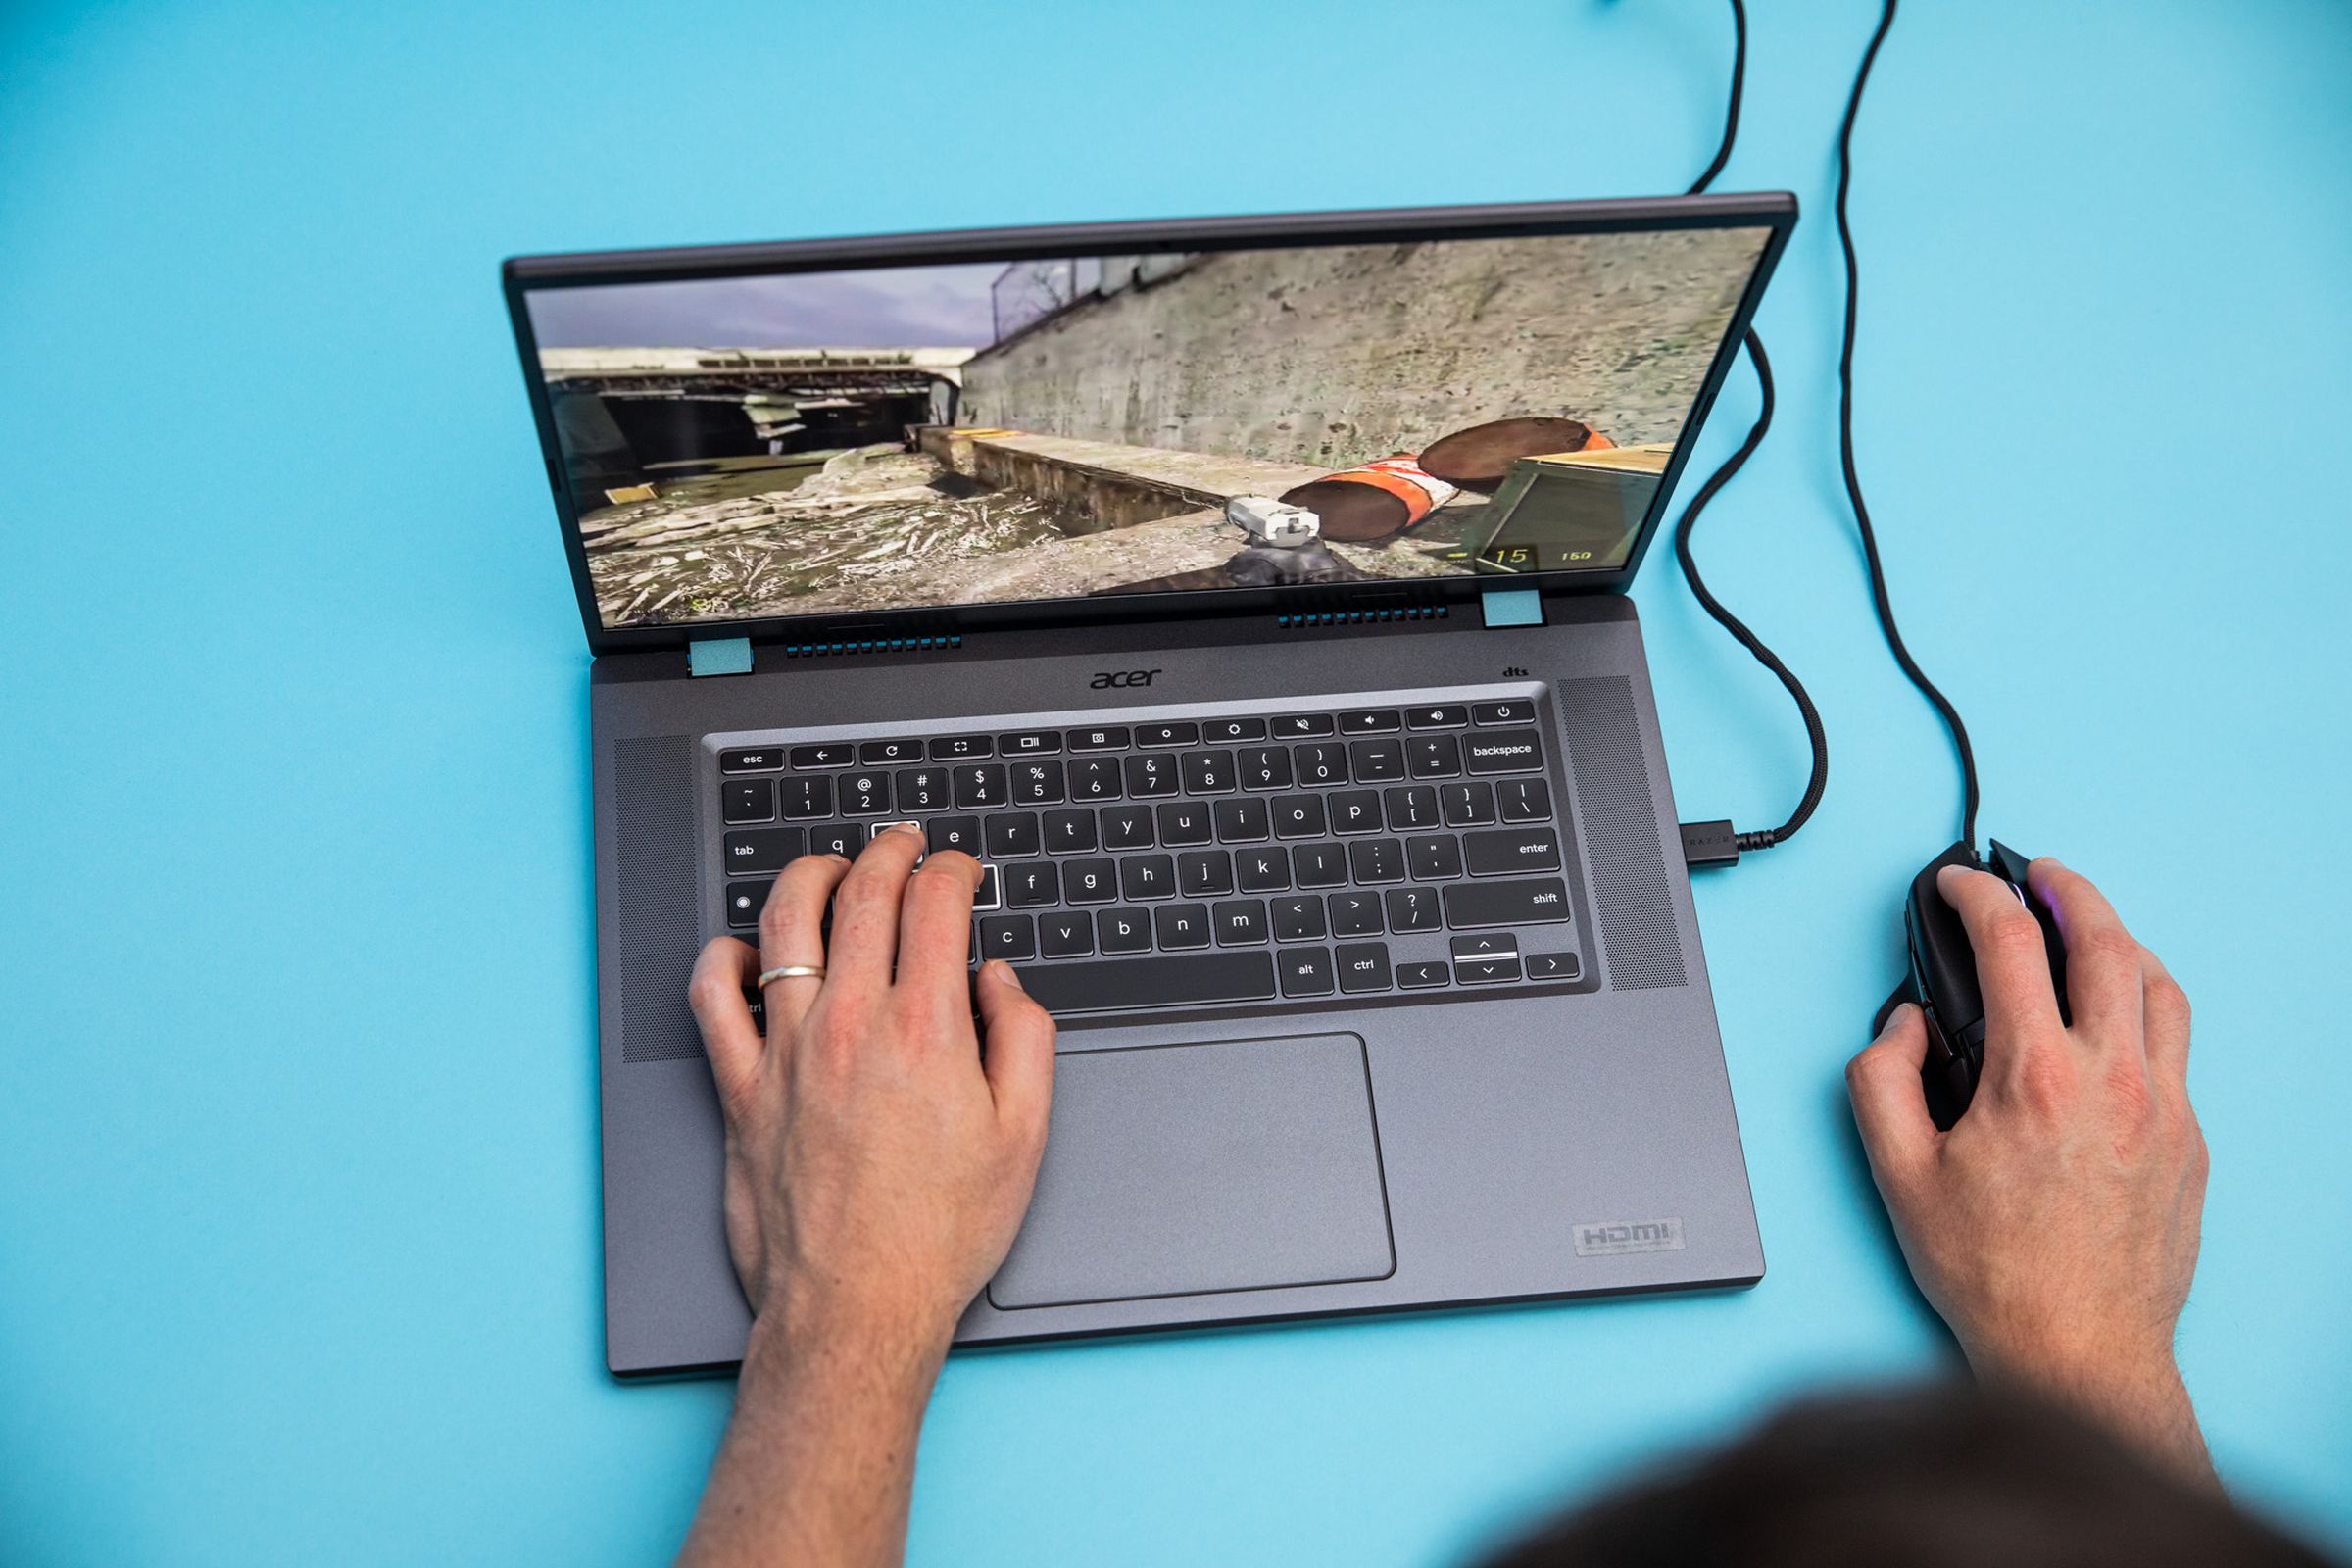 The Acer Chromebook 516 GE with a mouse plugged in, playing Half Life 2. The author’s left hand is placed on the laptop’s W, A, S, and D keys to move around.